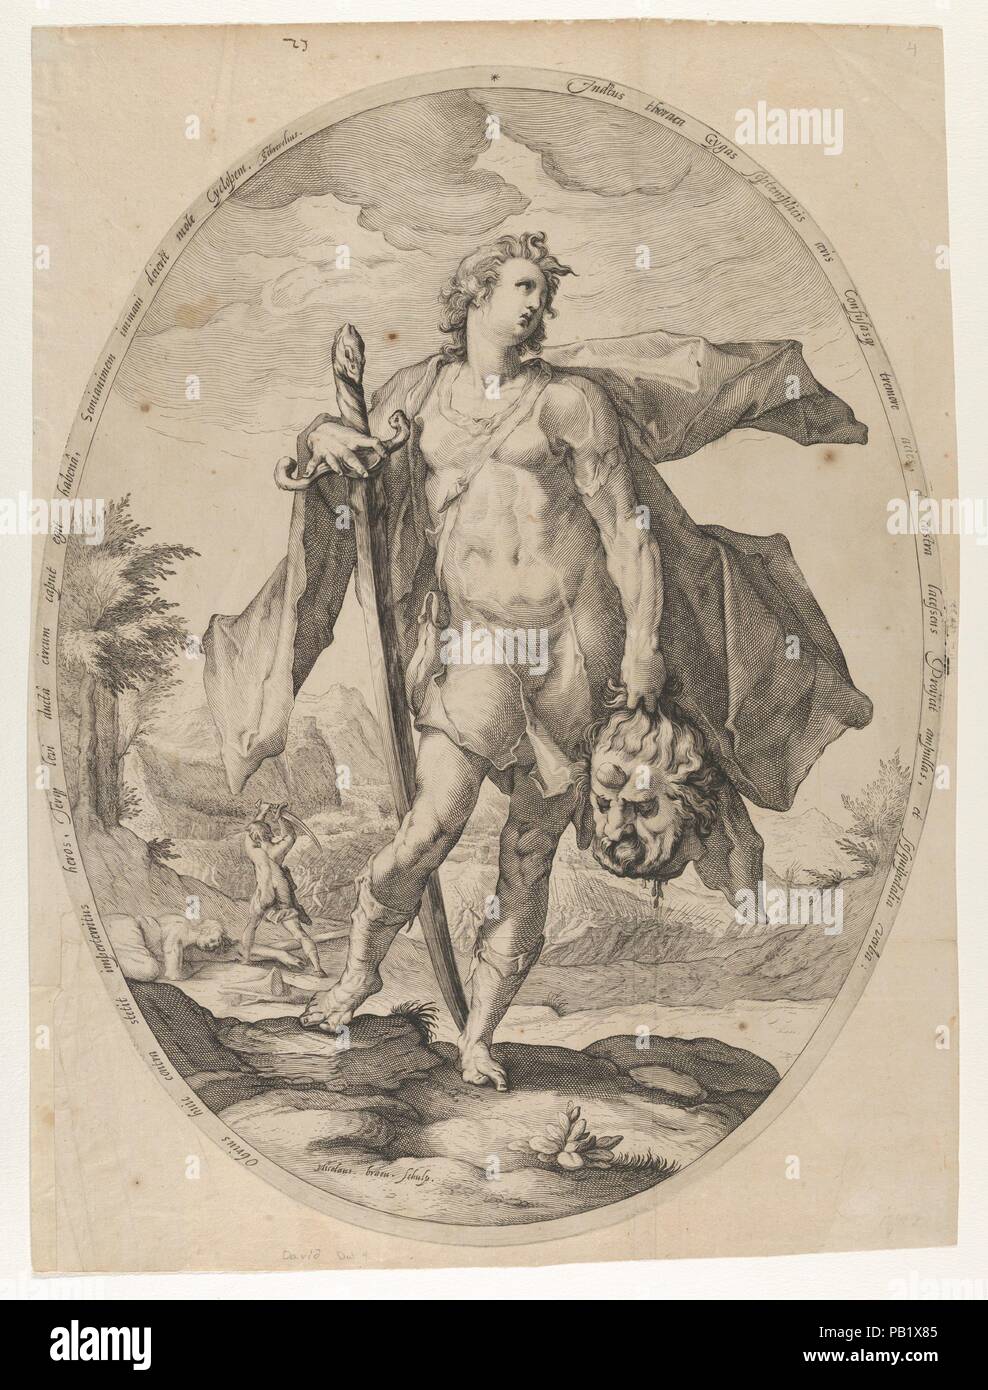 David from Heroes and Heroines of the Old Testament. Artist: After Hendrick Goltzius (Netherlandish, Mühlbracht 1558-1617 Haarlem); Nicolaes Braeu (Netherlandish, active Haarlem, ca. 1586-died 1600). Dimensions: Sheet: 17 1/2 x 13 in. (44.5 x 33 cm)  Plate (oval): 16 5/8 x 12 13/16 in. (42.2 x 32.5 cm). Date: ca. 1597. Museum: Metropolitan Museum of Art, New York, USA. Stock Photo